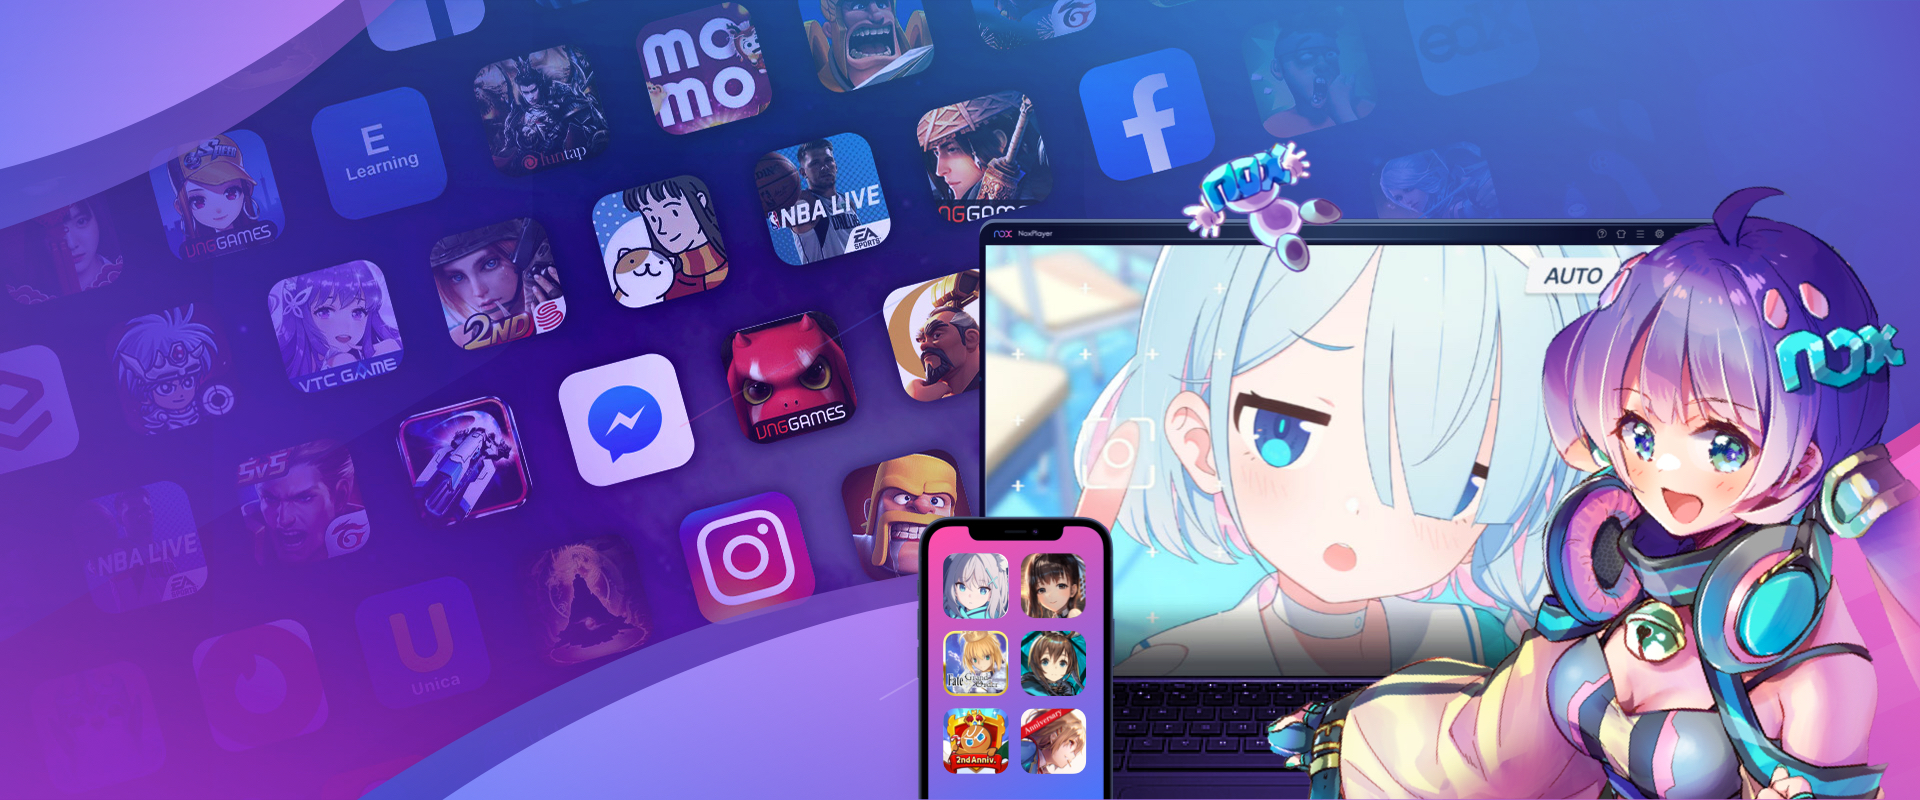 Download & Play Guardian Goddess: Idle RPG on PC & Mac with NoxPlayer (Emulator)